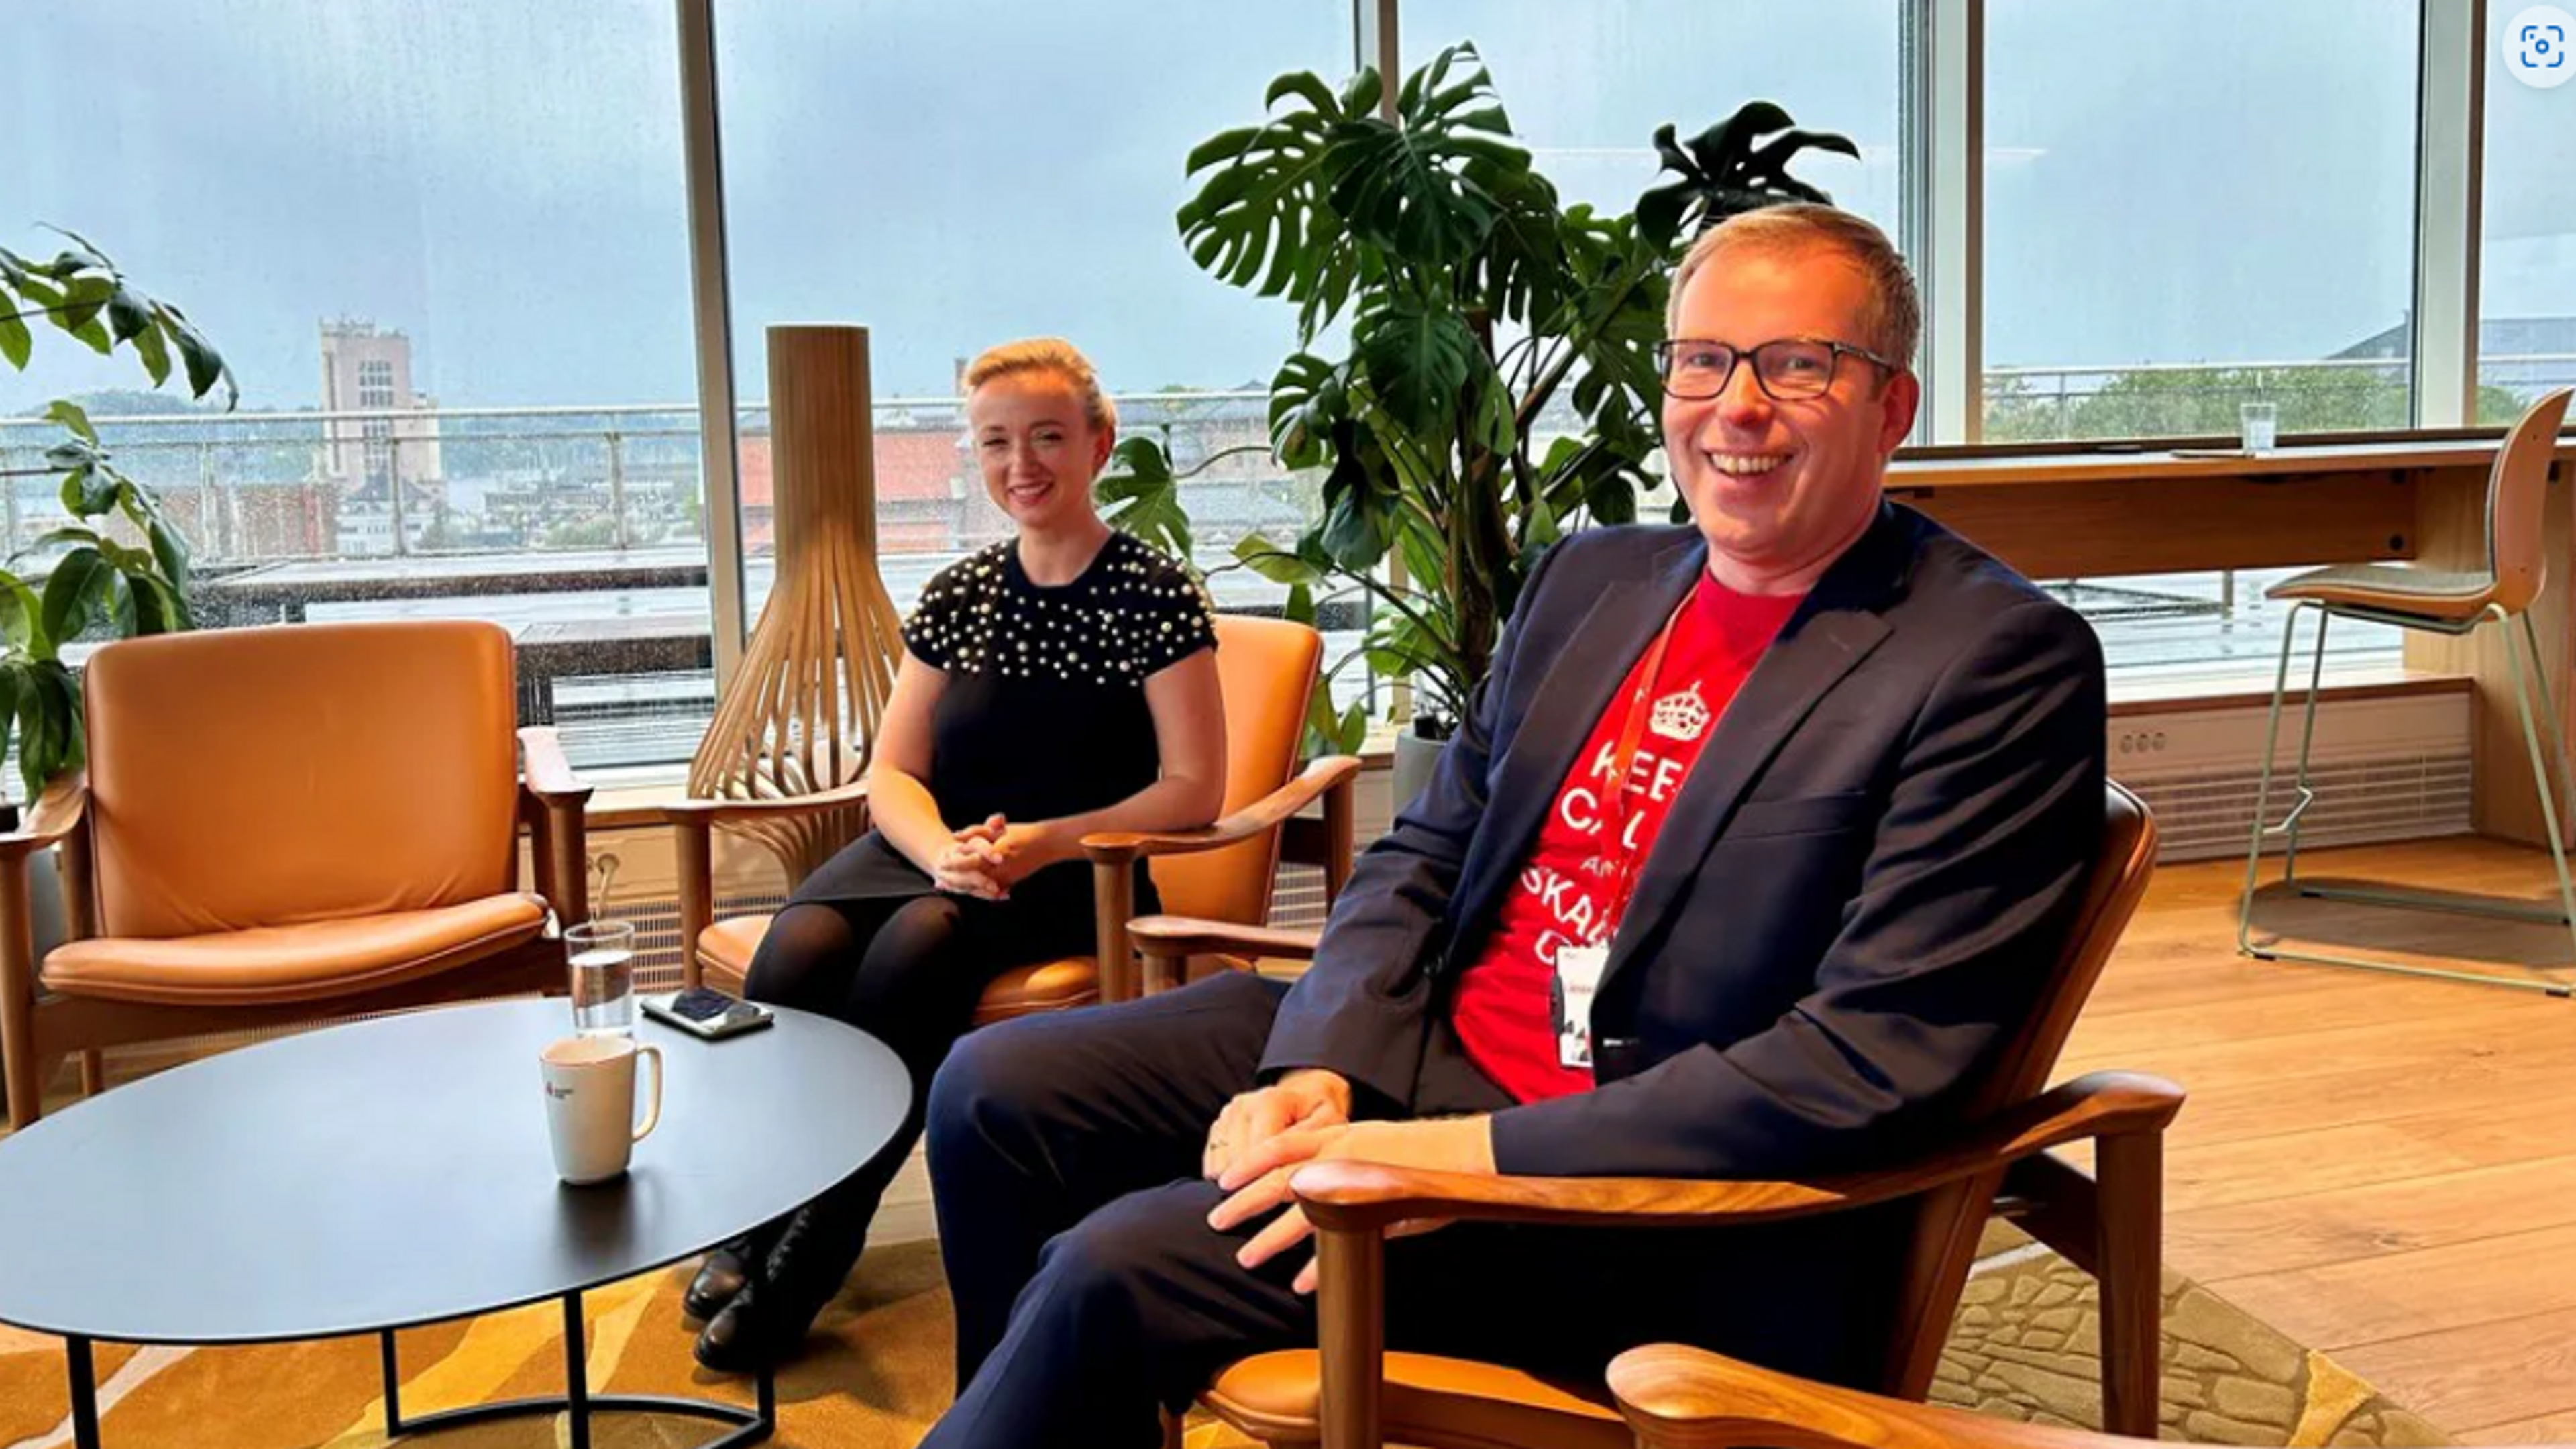 A pitcure of the CEO Håkon Haugli and business owner Iulia Caizer